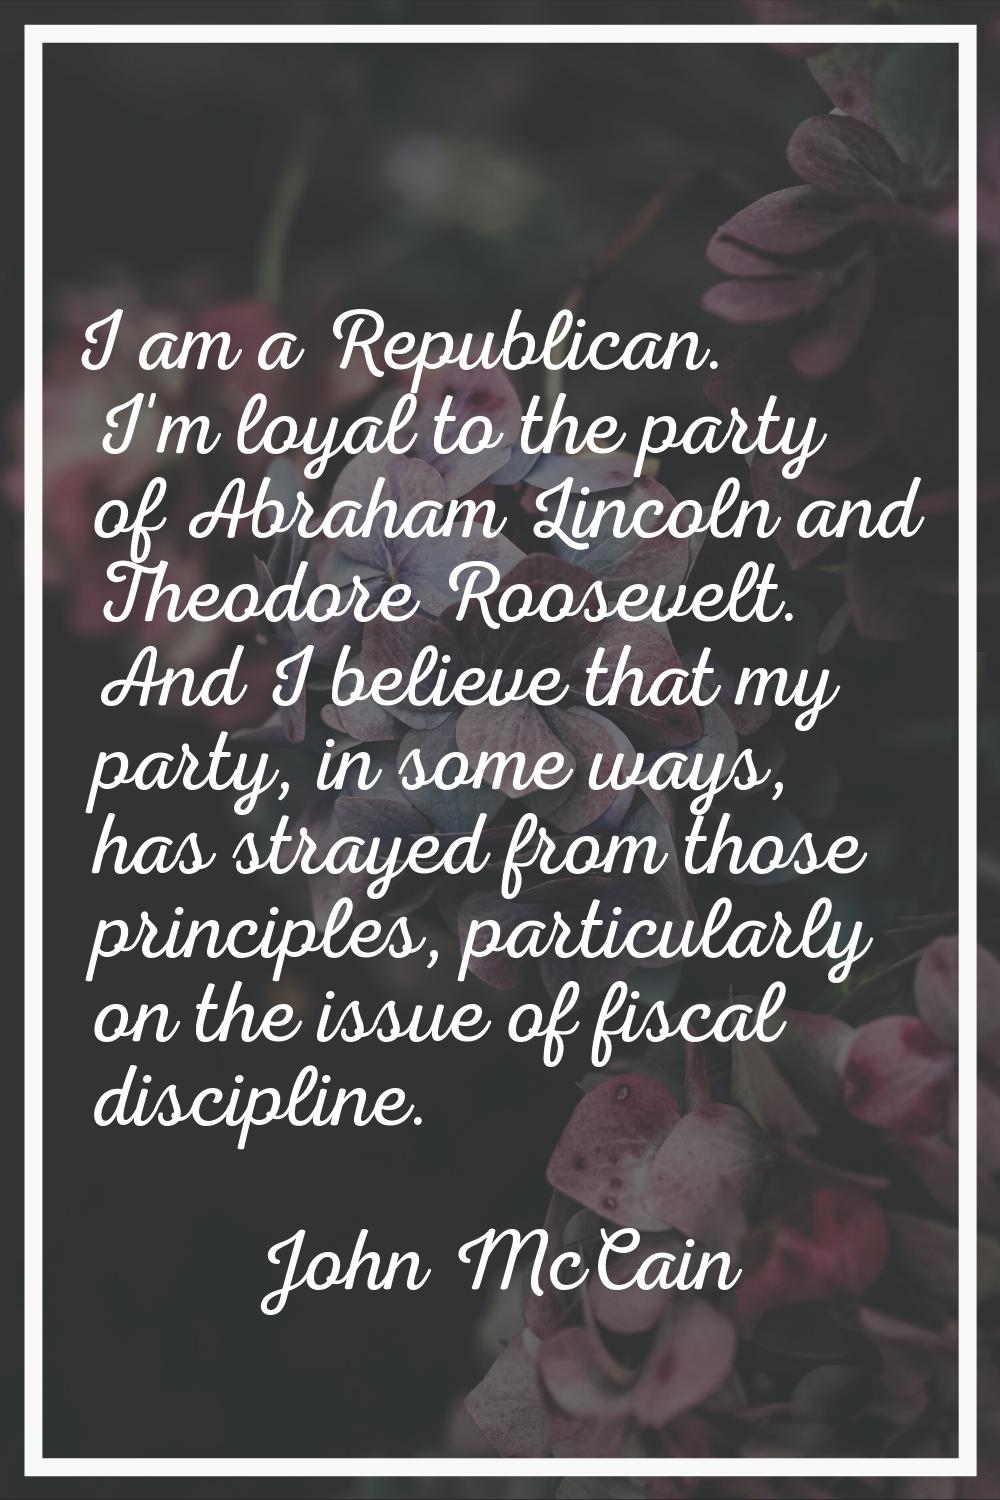 I am a Republican. I'm loyal to the party of Abraham Lincoln and Theodore Roosevelt. And I believe 